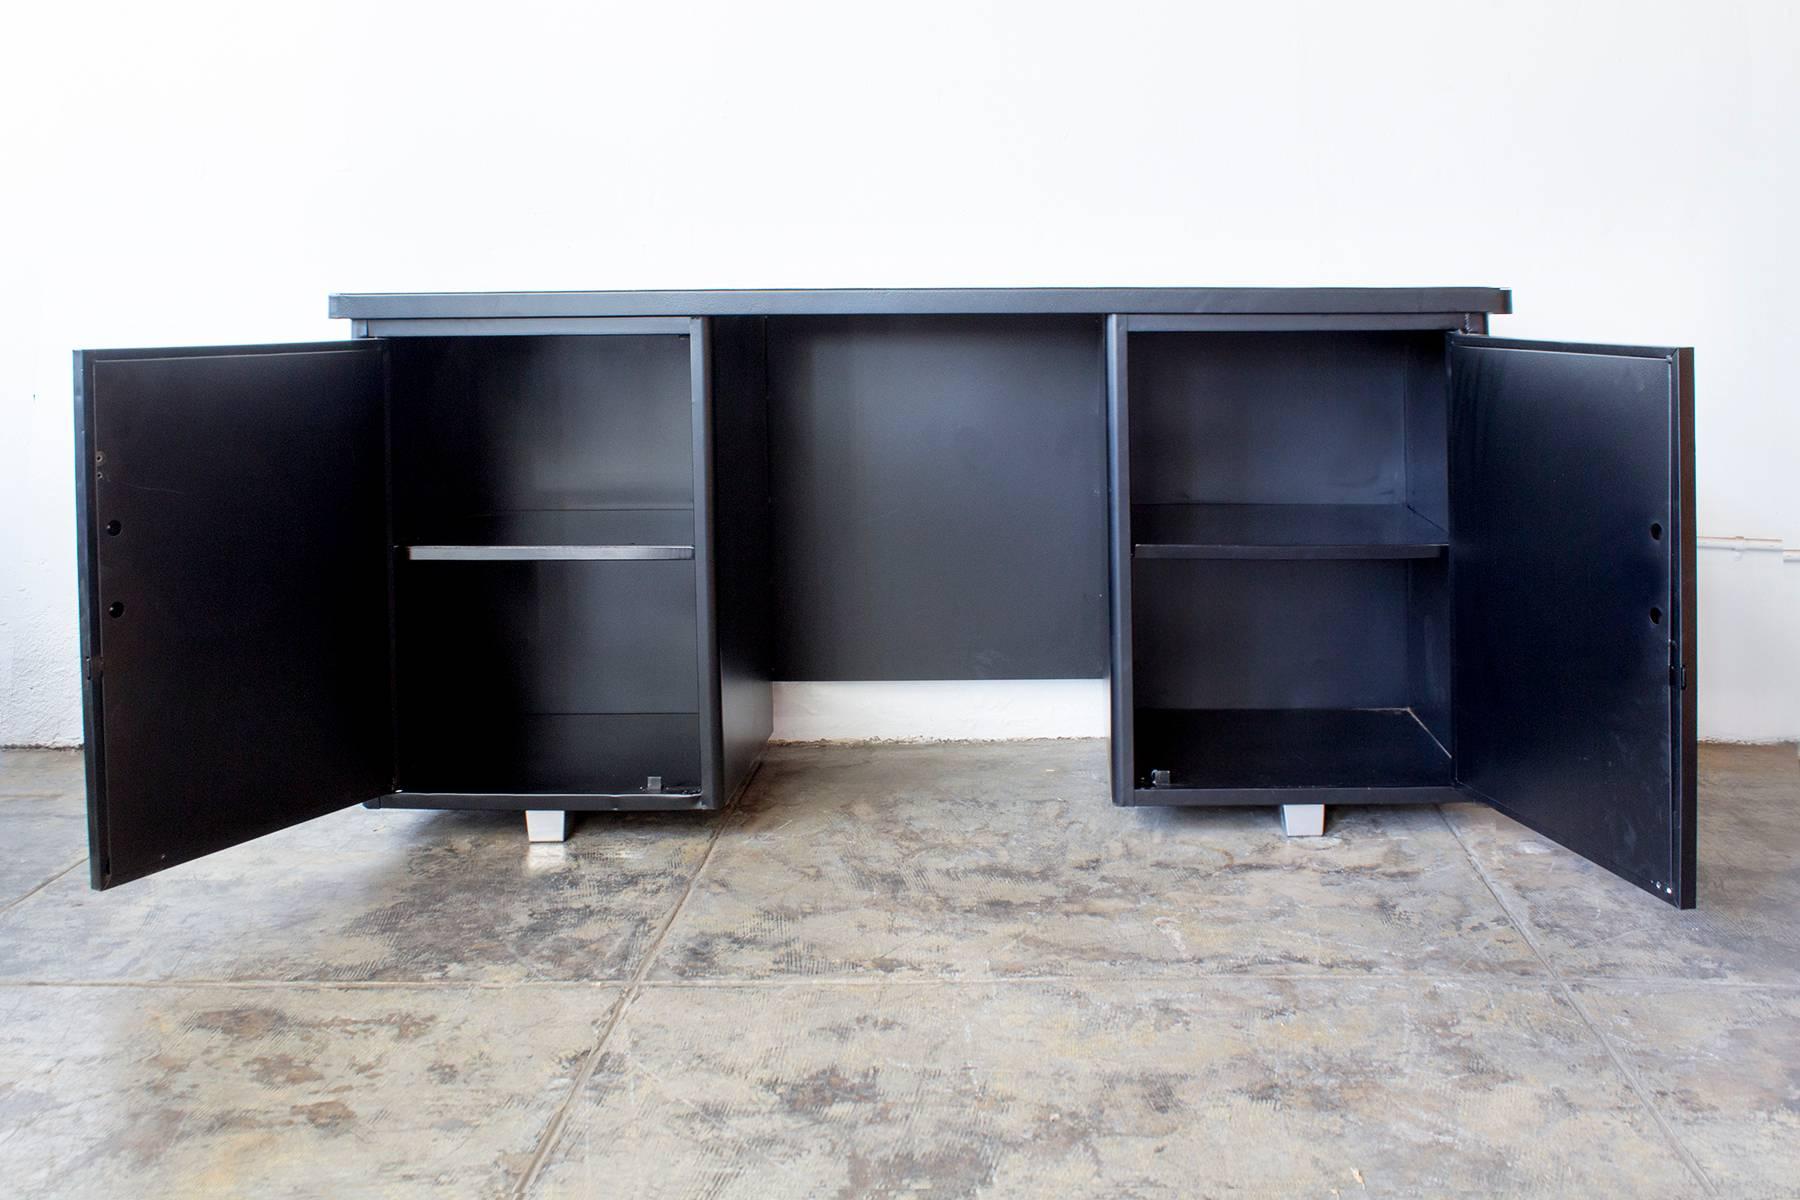 Our 1960s knee-space tanker credenza is a console table with the added functionality of a slim desk. This Classic mad men era piece offers ample storage, including two multi-shelf cabinets. We restored this piece in a beautiful semi-gloss black